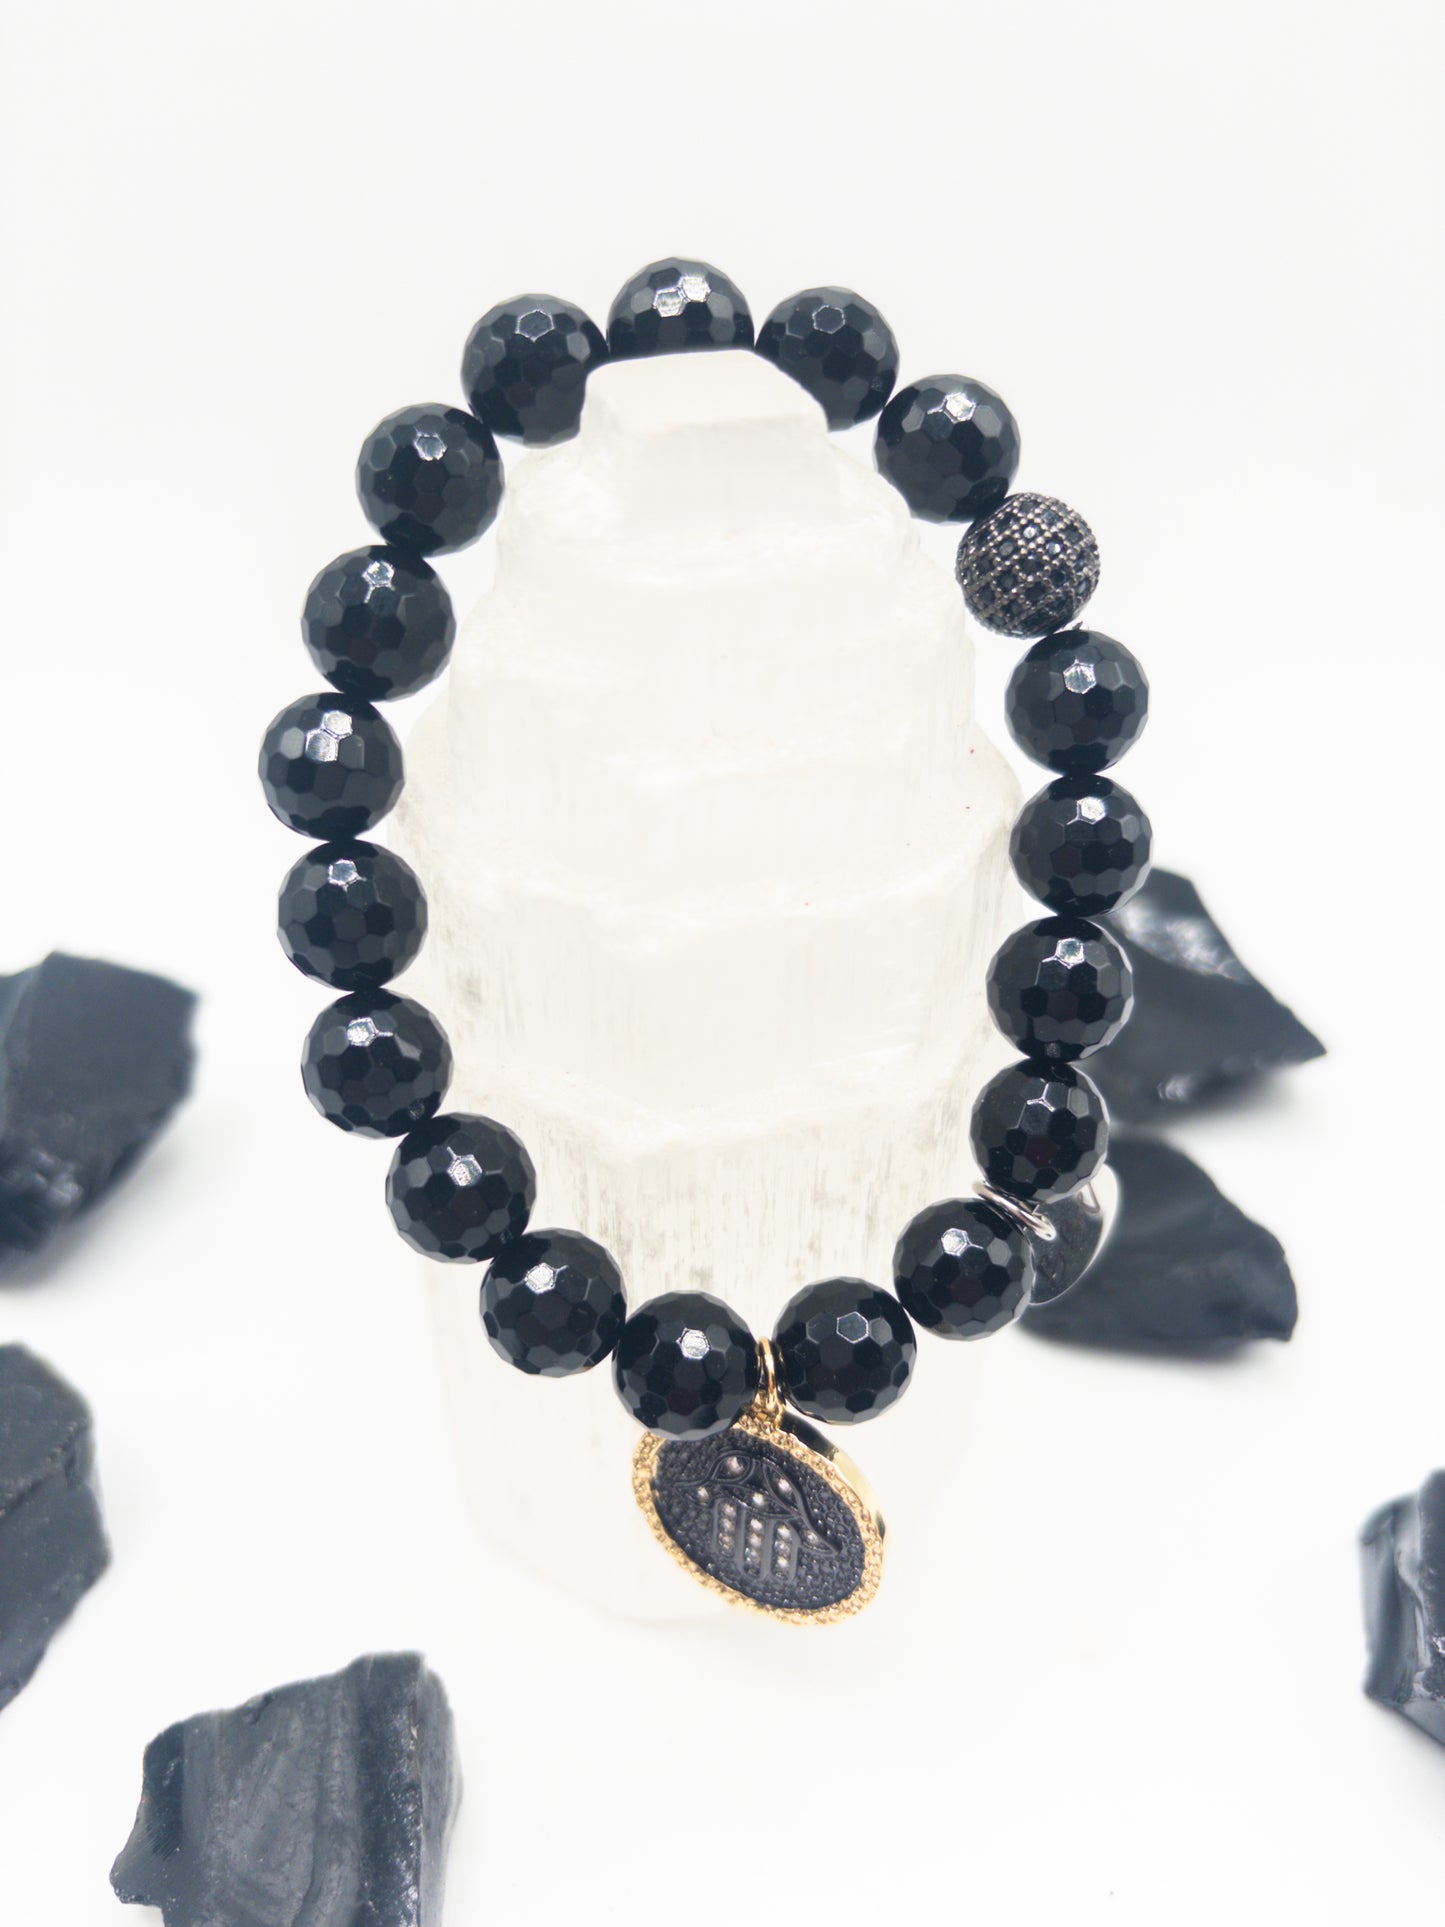 BBV Luxe Faceted Black Onyx Crystal Bracelet With Charm